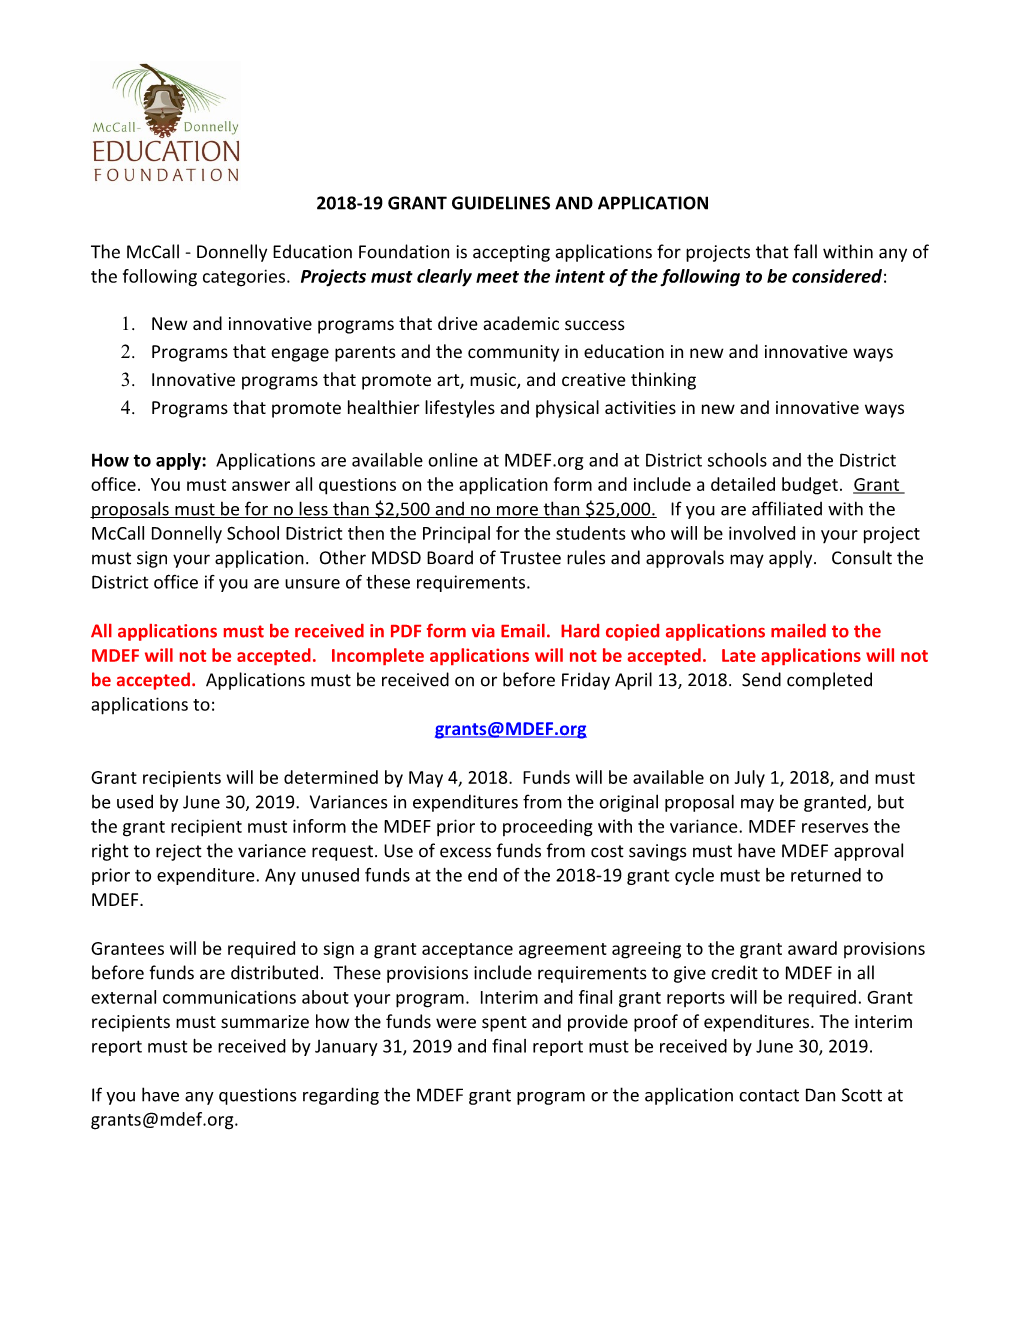 2018-19 Grant Guidelines and Application